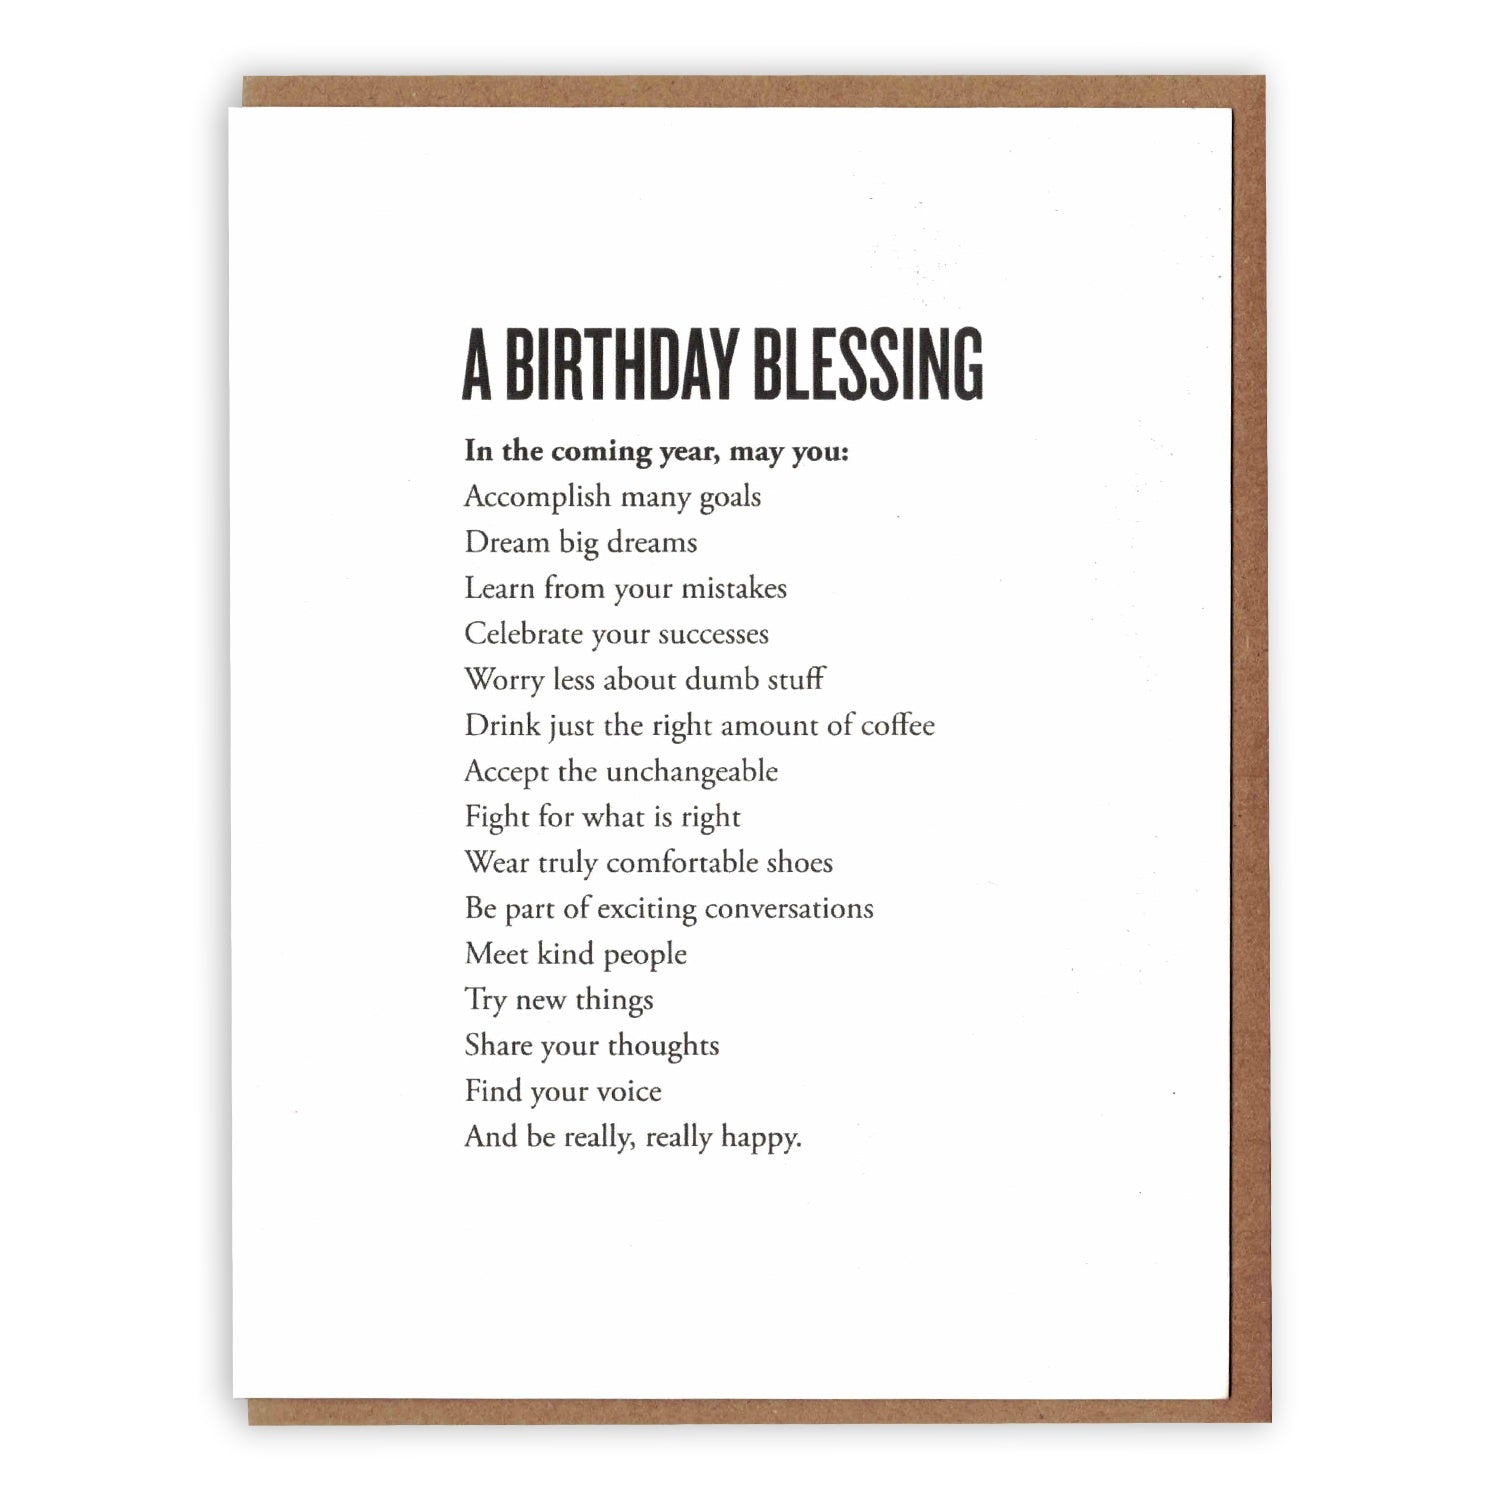 A Birthday Blessing Card